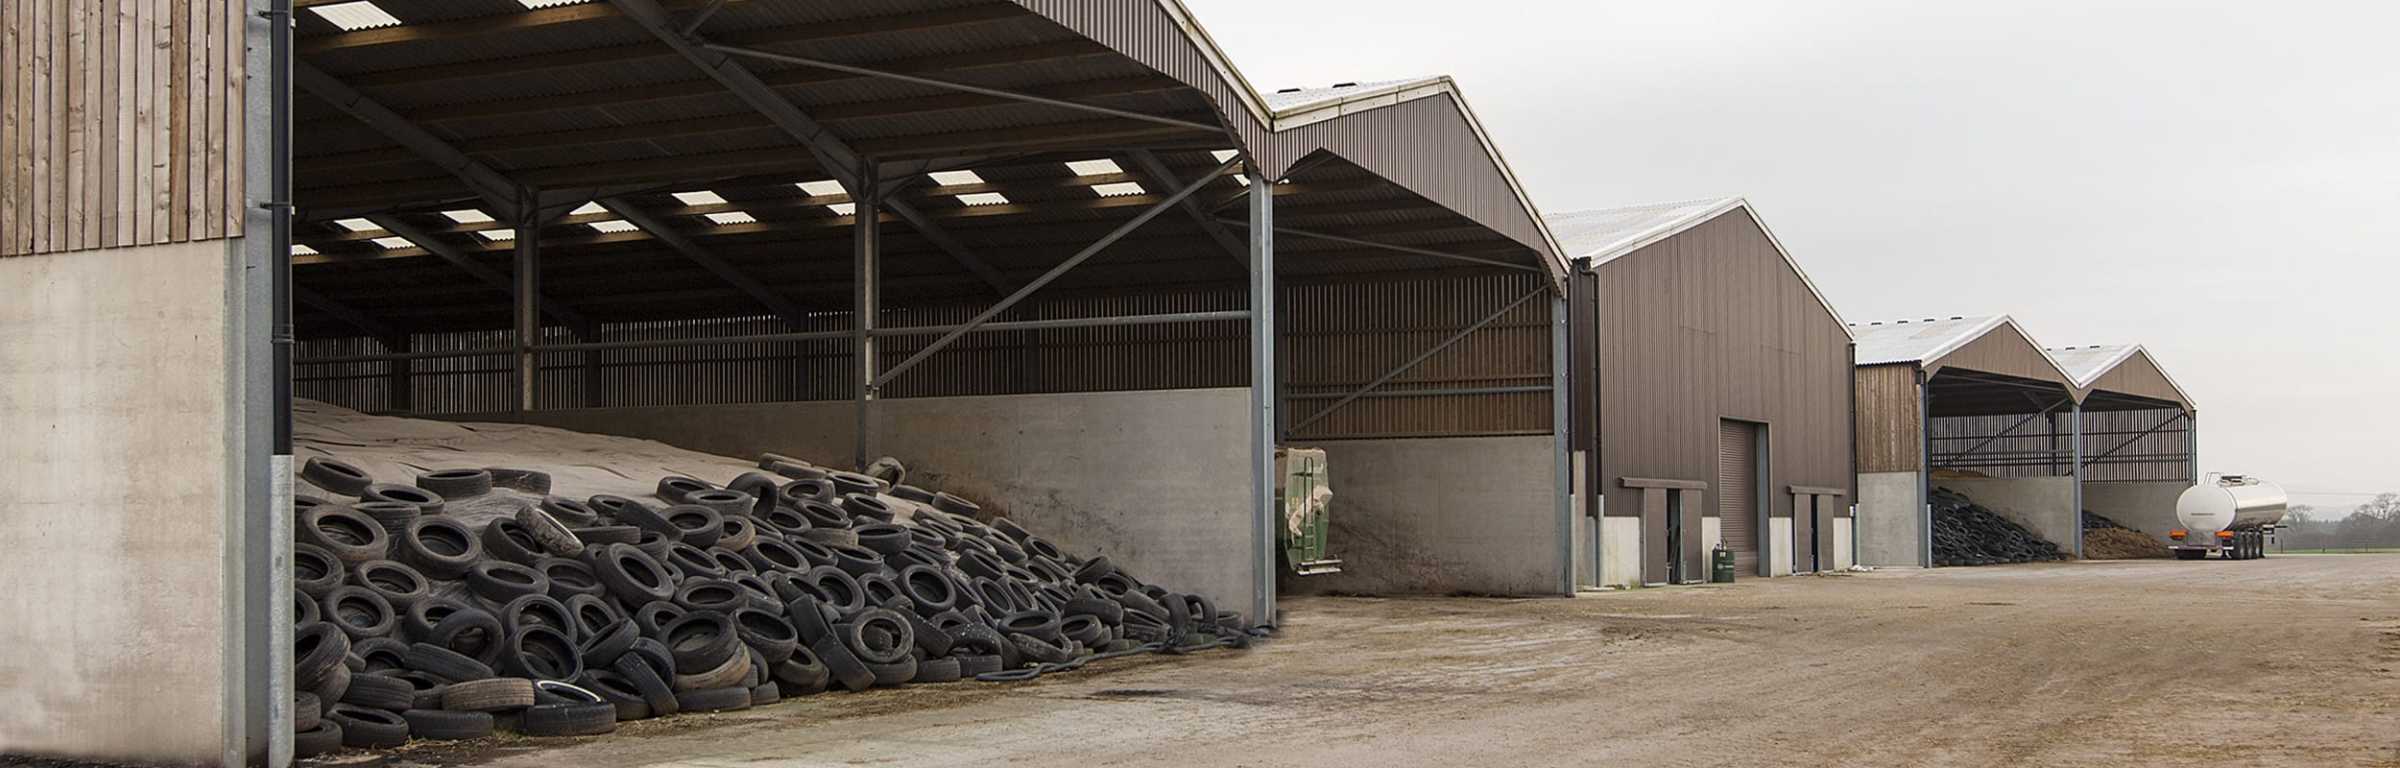 Silage Clamps